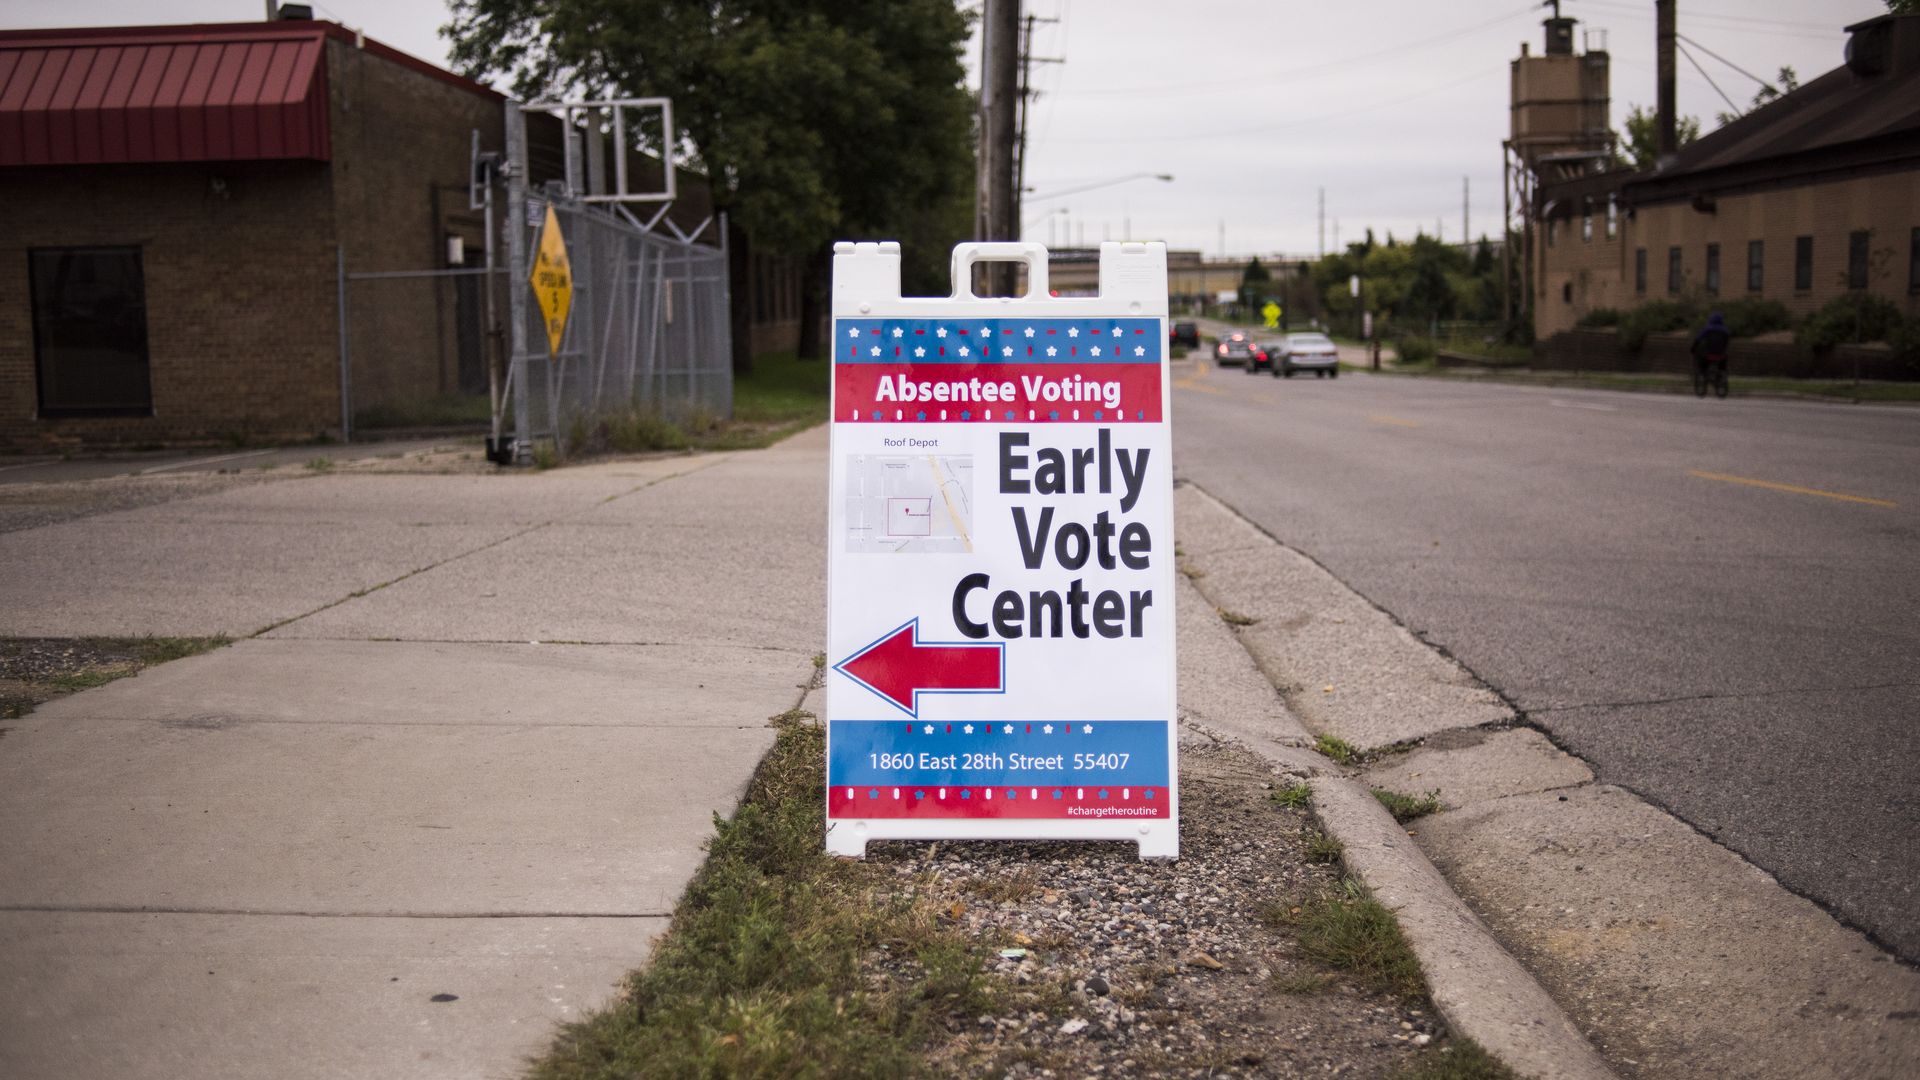 early vote center sign